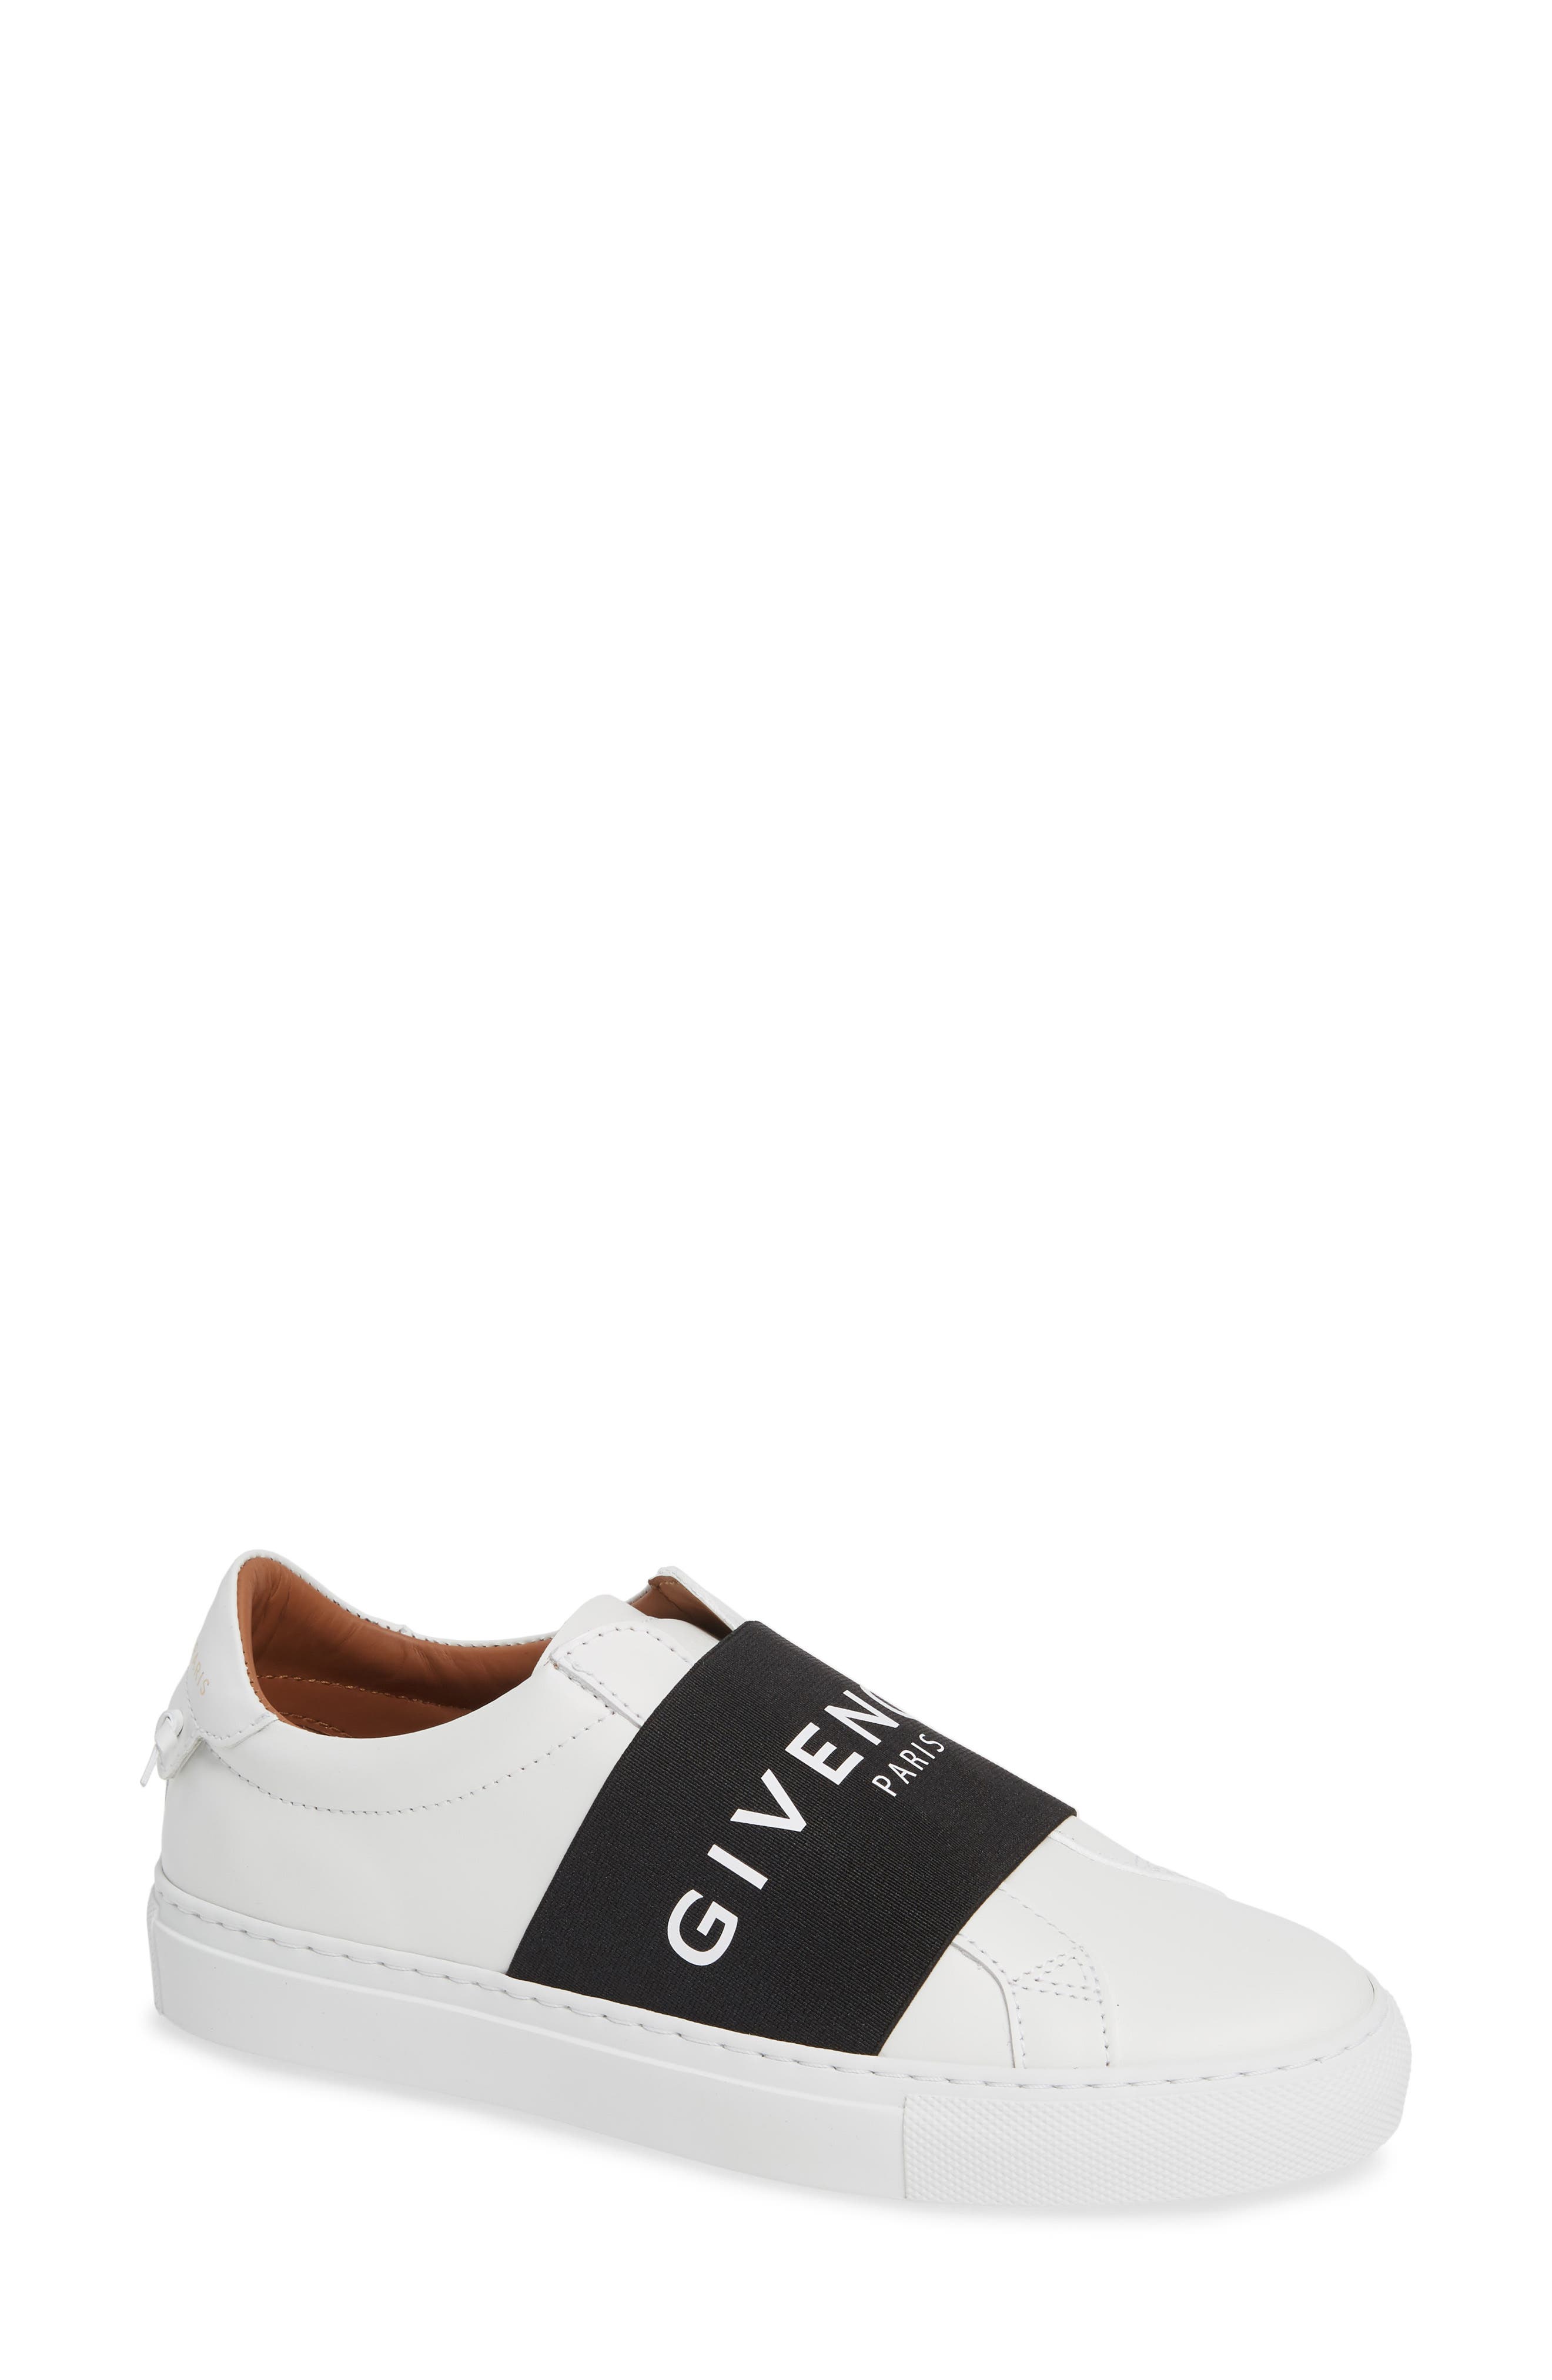 Women's Givenchy Slip-On Sneakers 